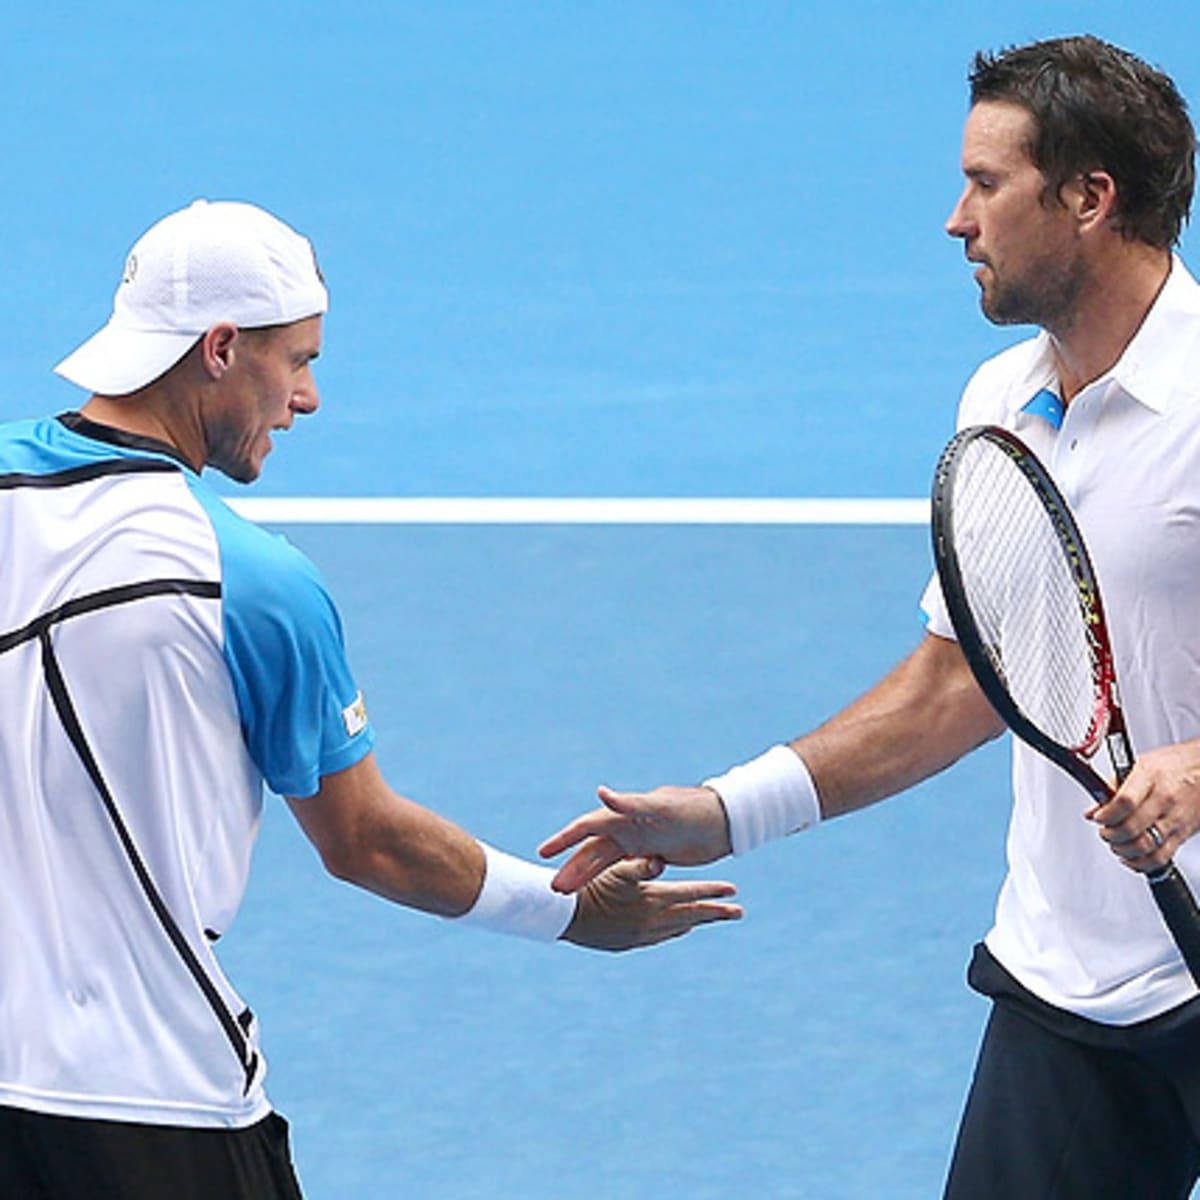 Patrick Rafter Congratulating His Opponent Post Match Wallpaper